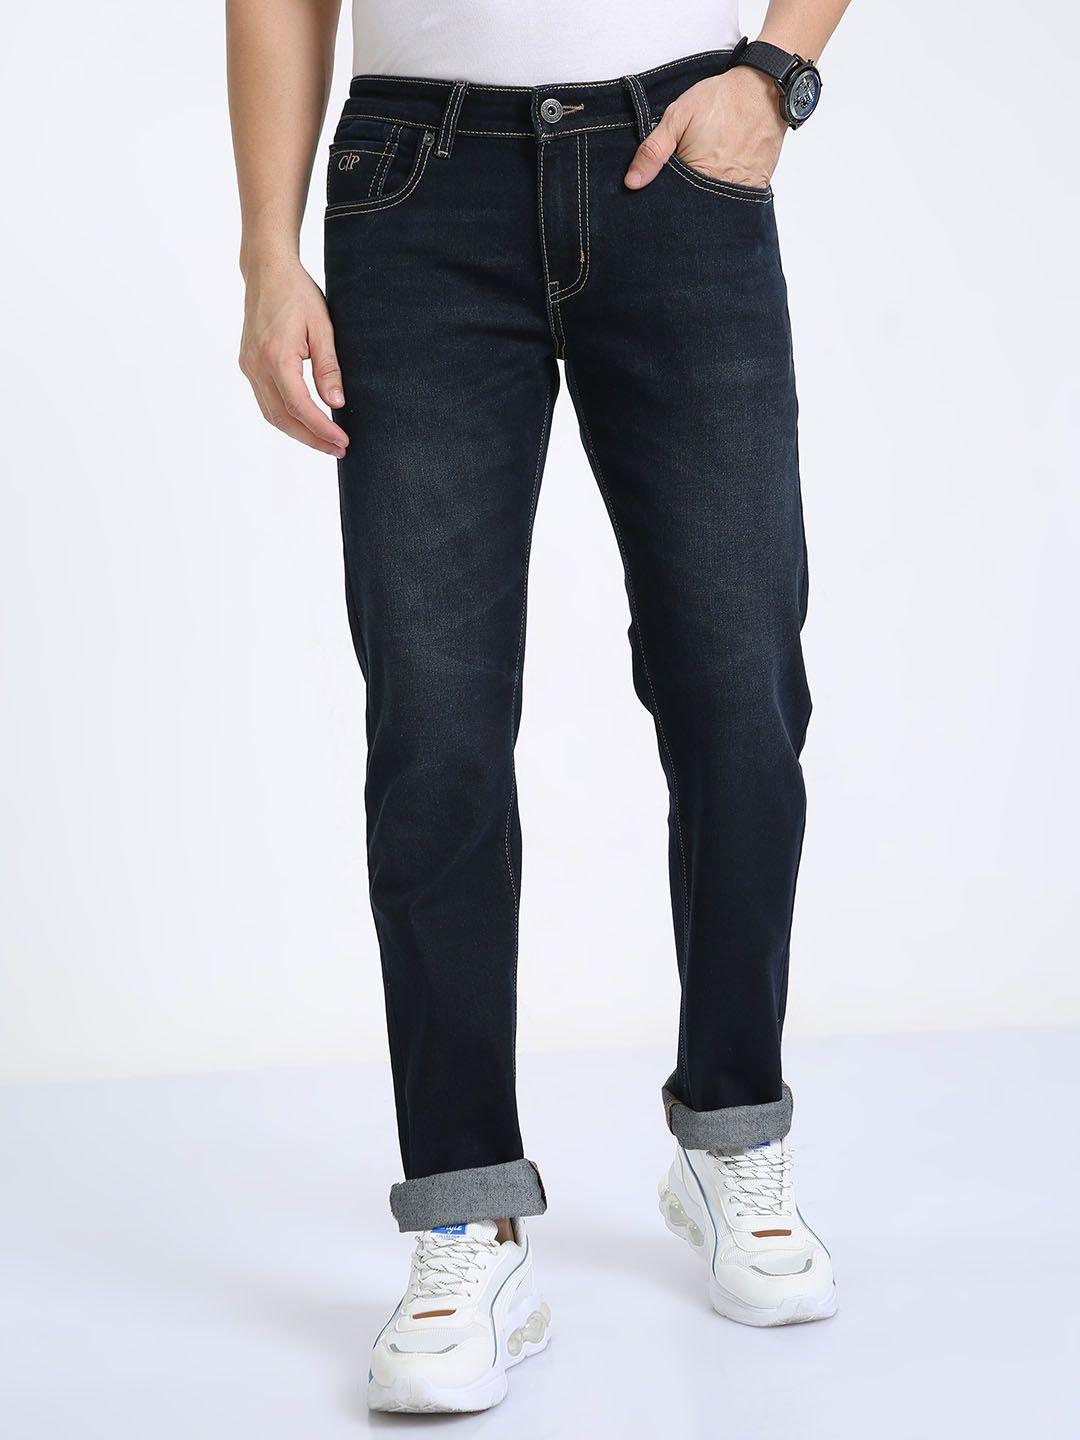 classic-polo-jean-slim-fit-light-fade-clean-look-stretchable-jeans